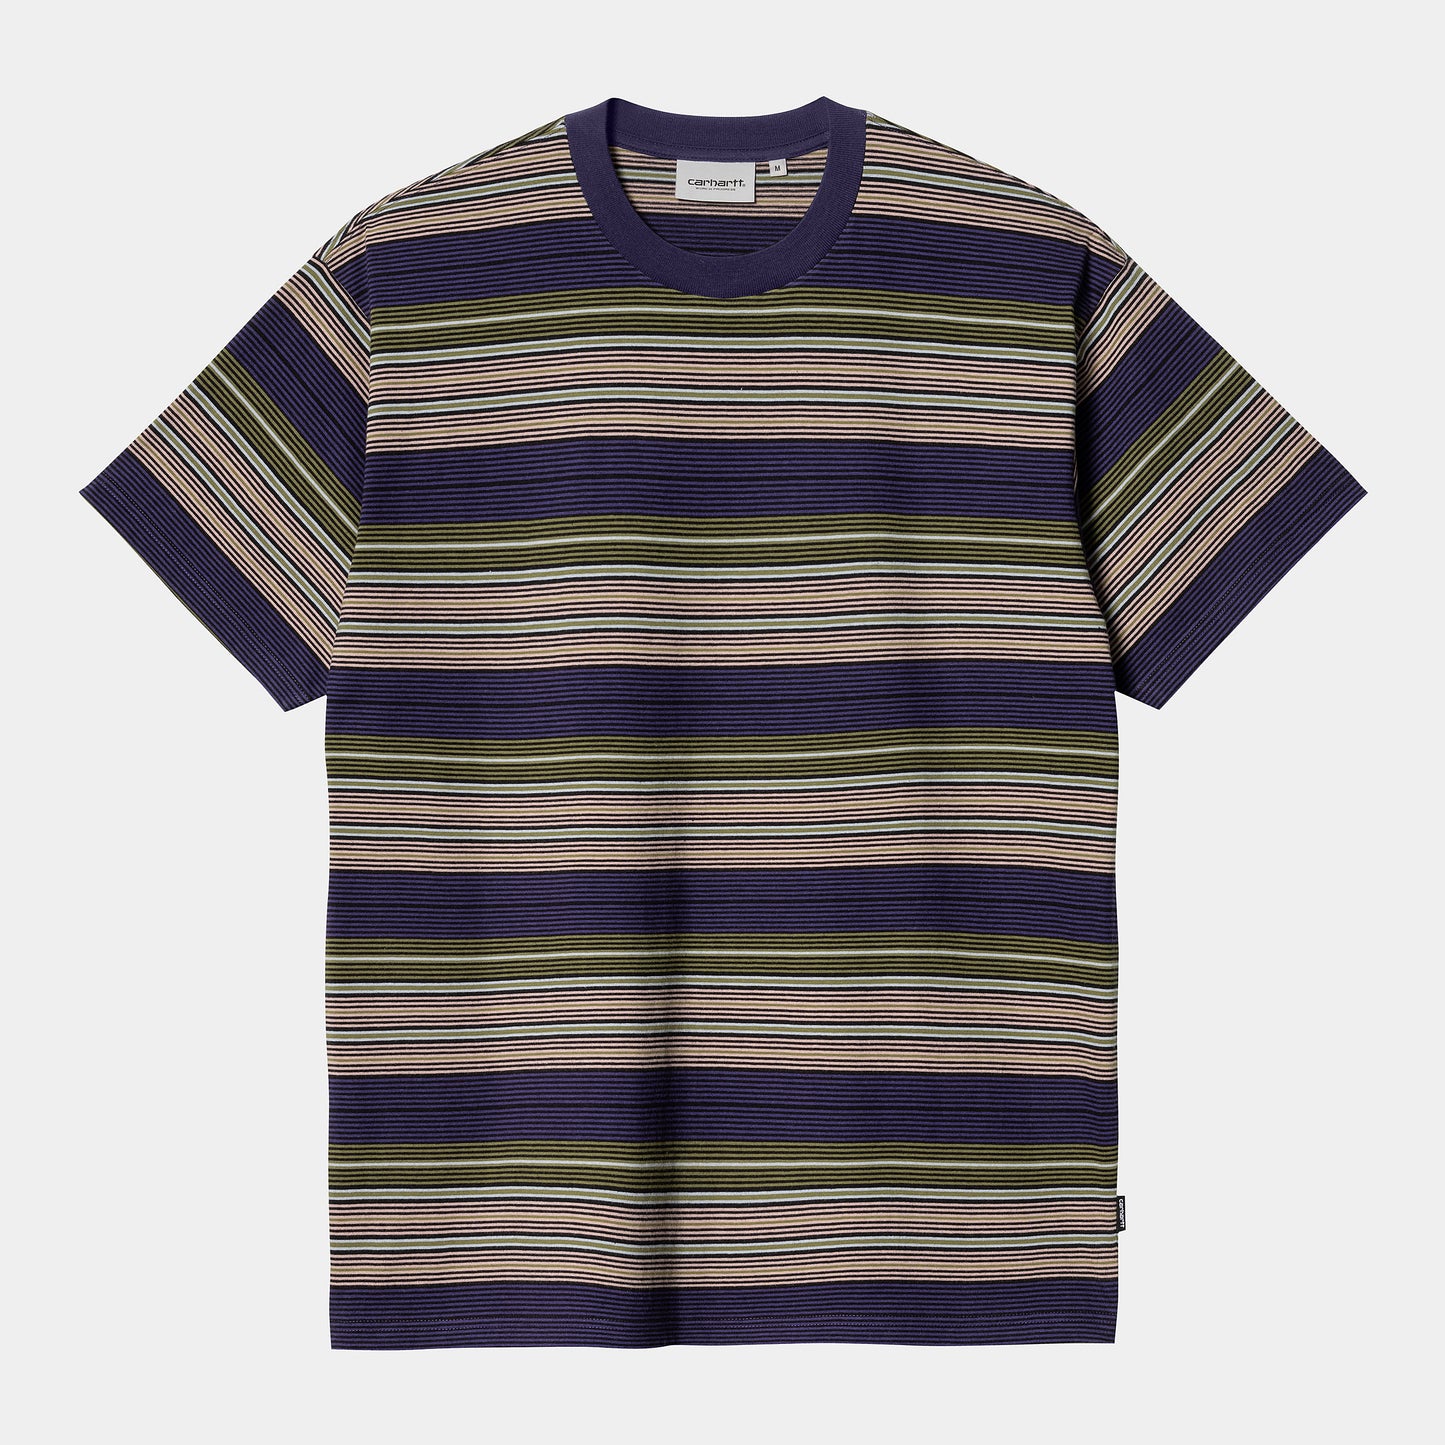 CARHARTT WIP S/S COBY T-Shirt - Colby Stripe Tyrian